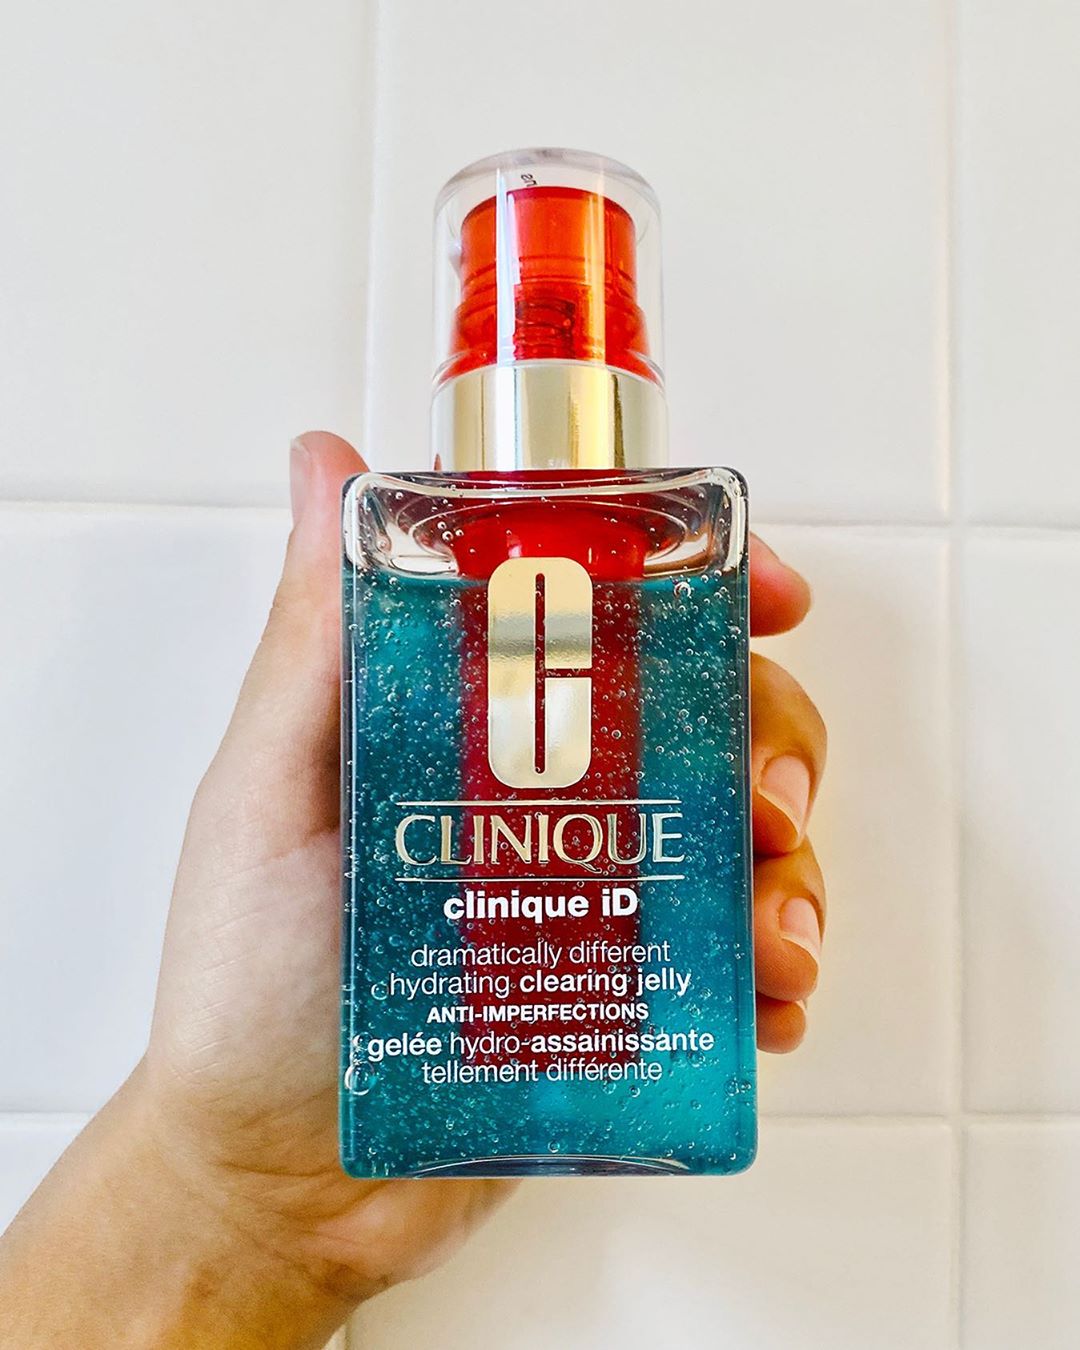 Clinique - The path to clearer-looking skin is here📍With new Clinique iD for Imperfections, 82% said skin looked clearer in 7 days. Now available on clinique.com. 

#Clinique #beauty #skincare #parabe...